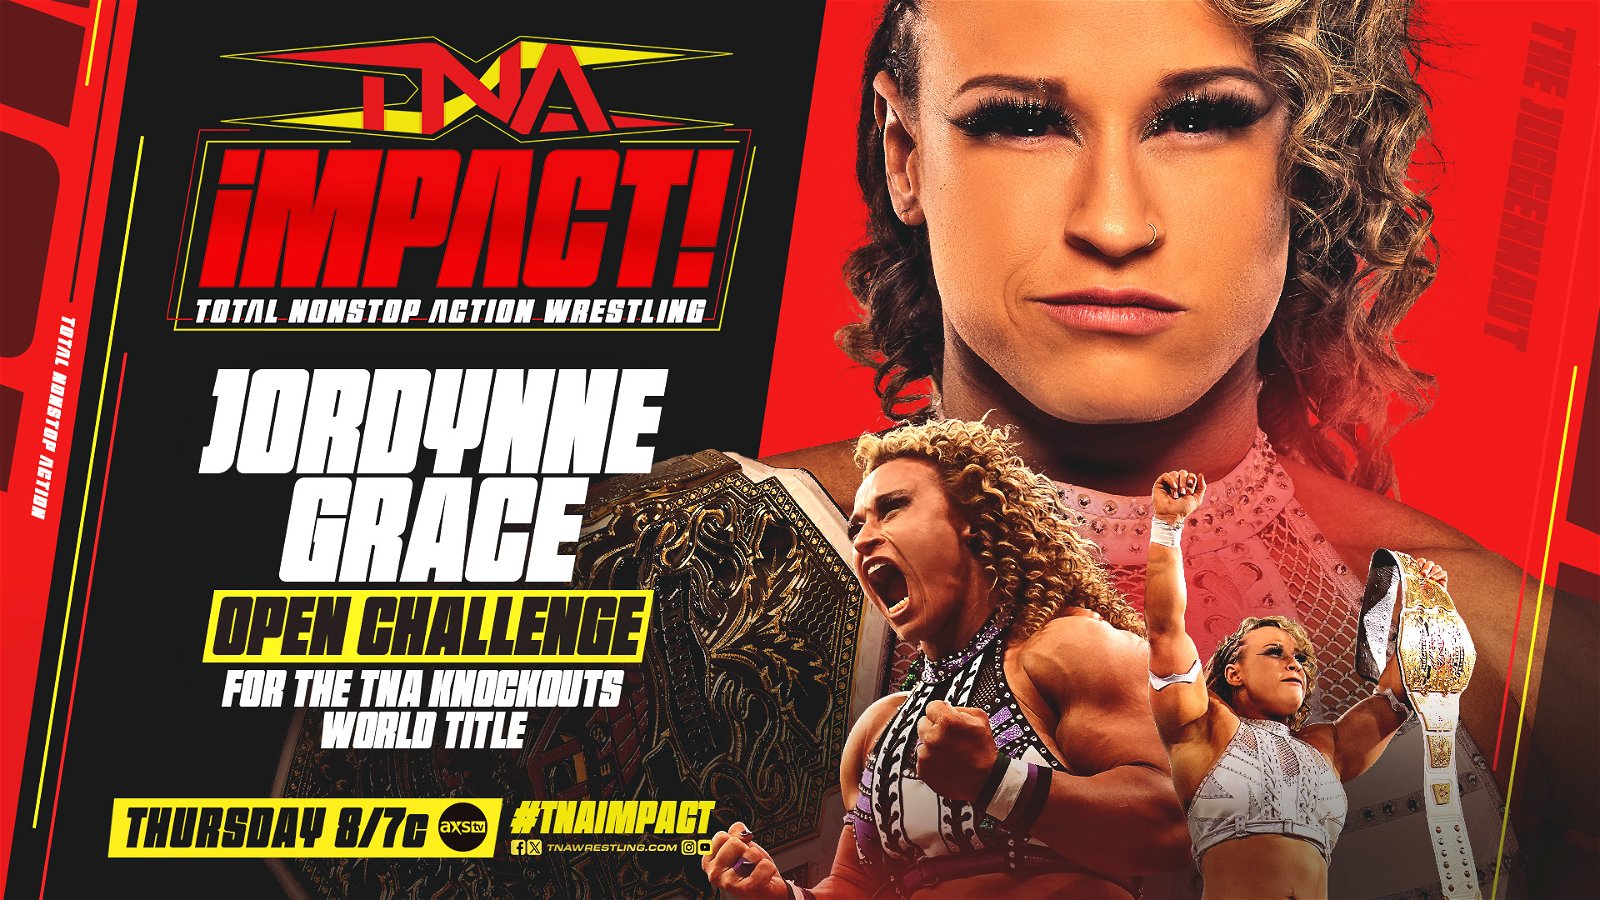 TNA Impact Live Results: Jordynne Grace Open Challenge, Charlie Dempsey in Action